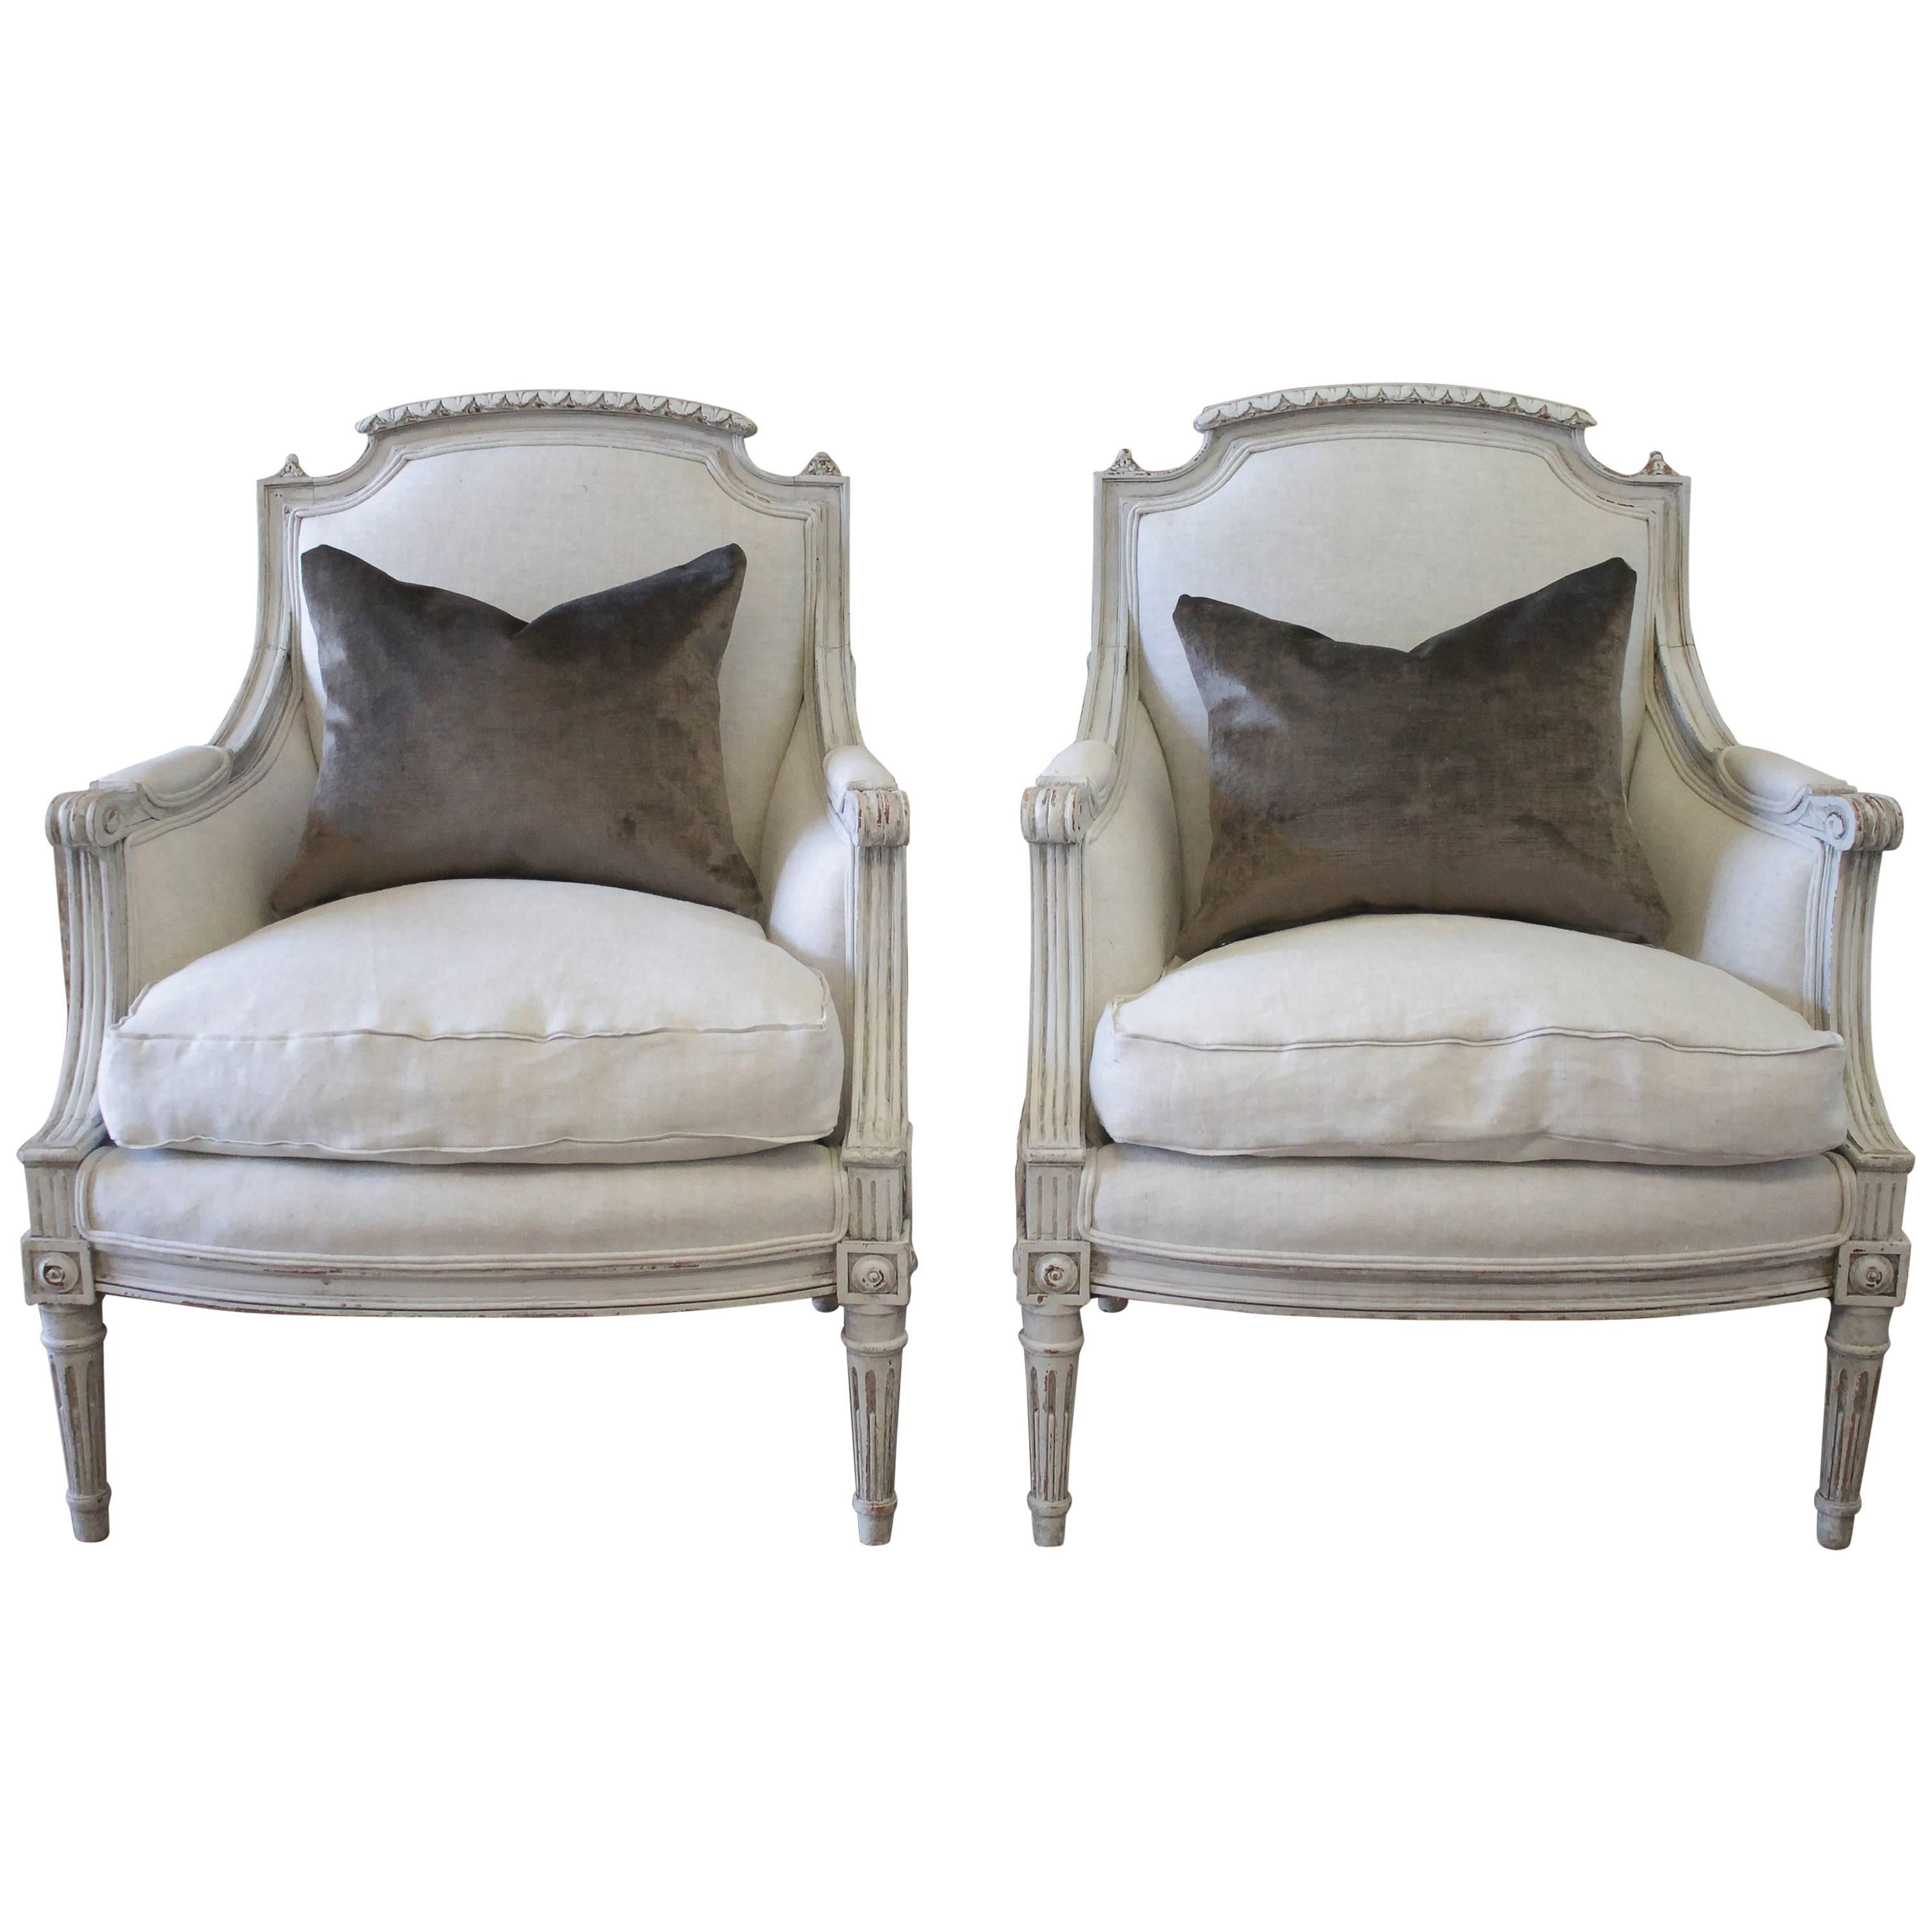 Pair of Louis XVI Style Painted and Upholstered Bergere Chairs